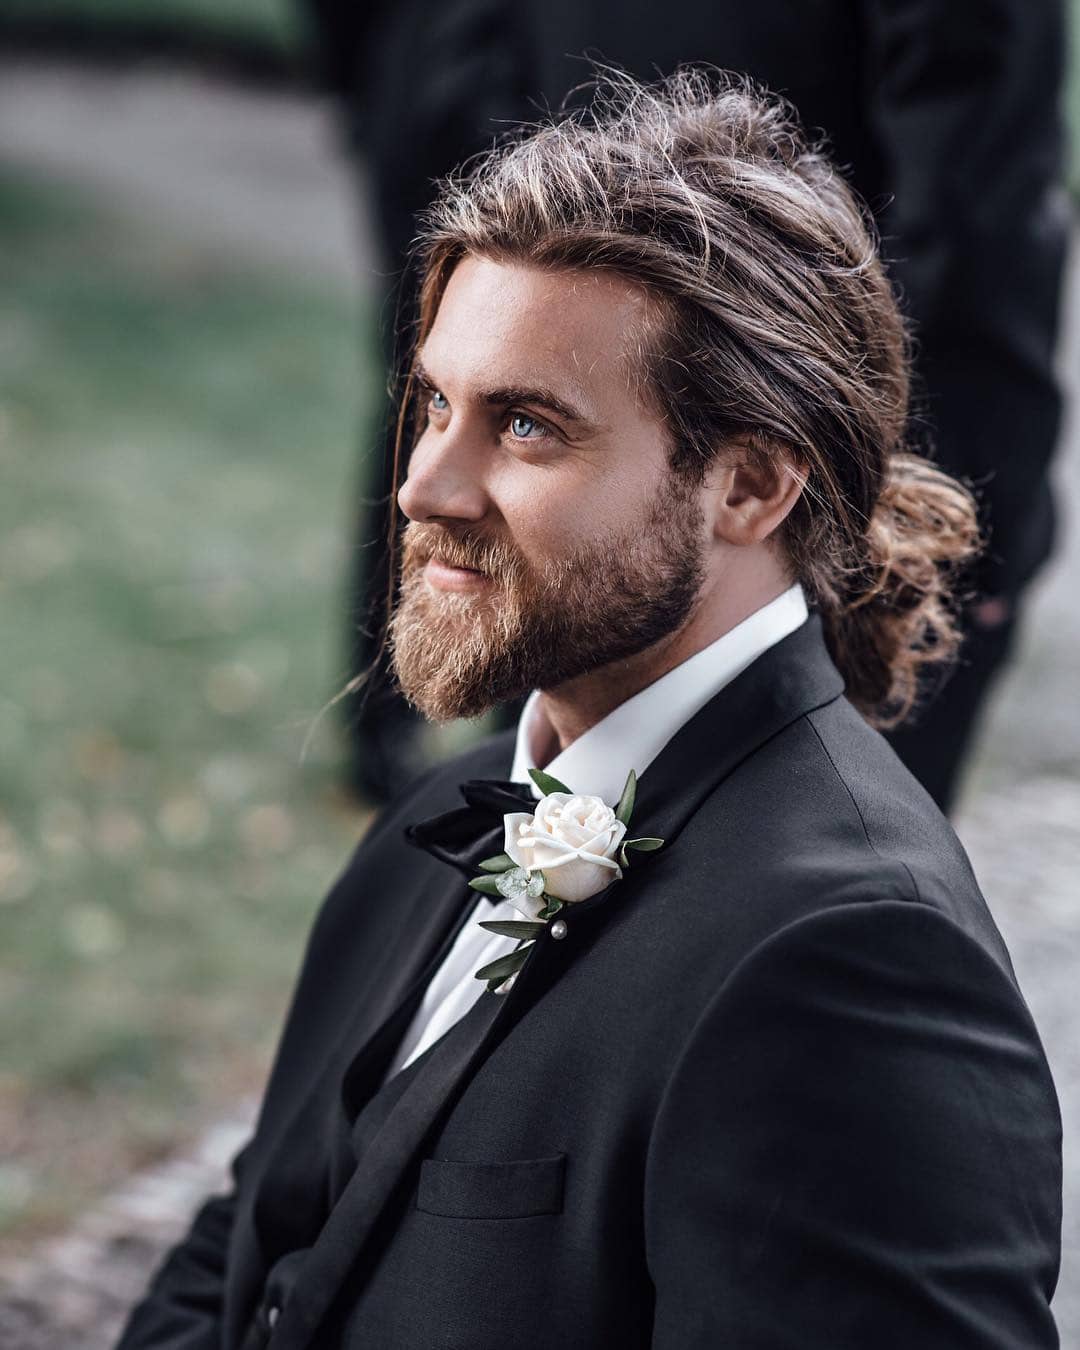 Brock O'Hurn wearing a suit at his best friend's wedding